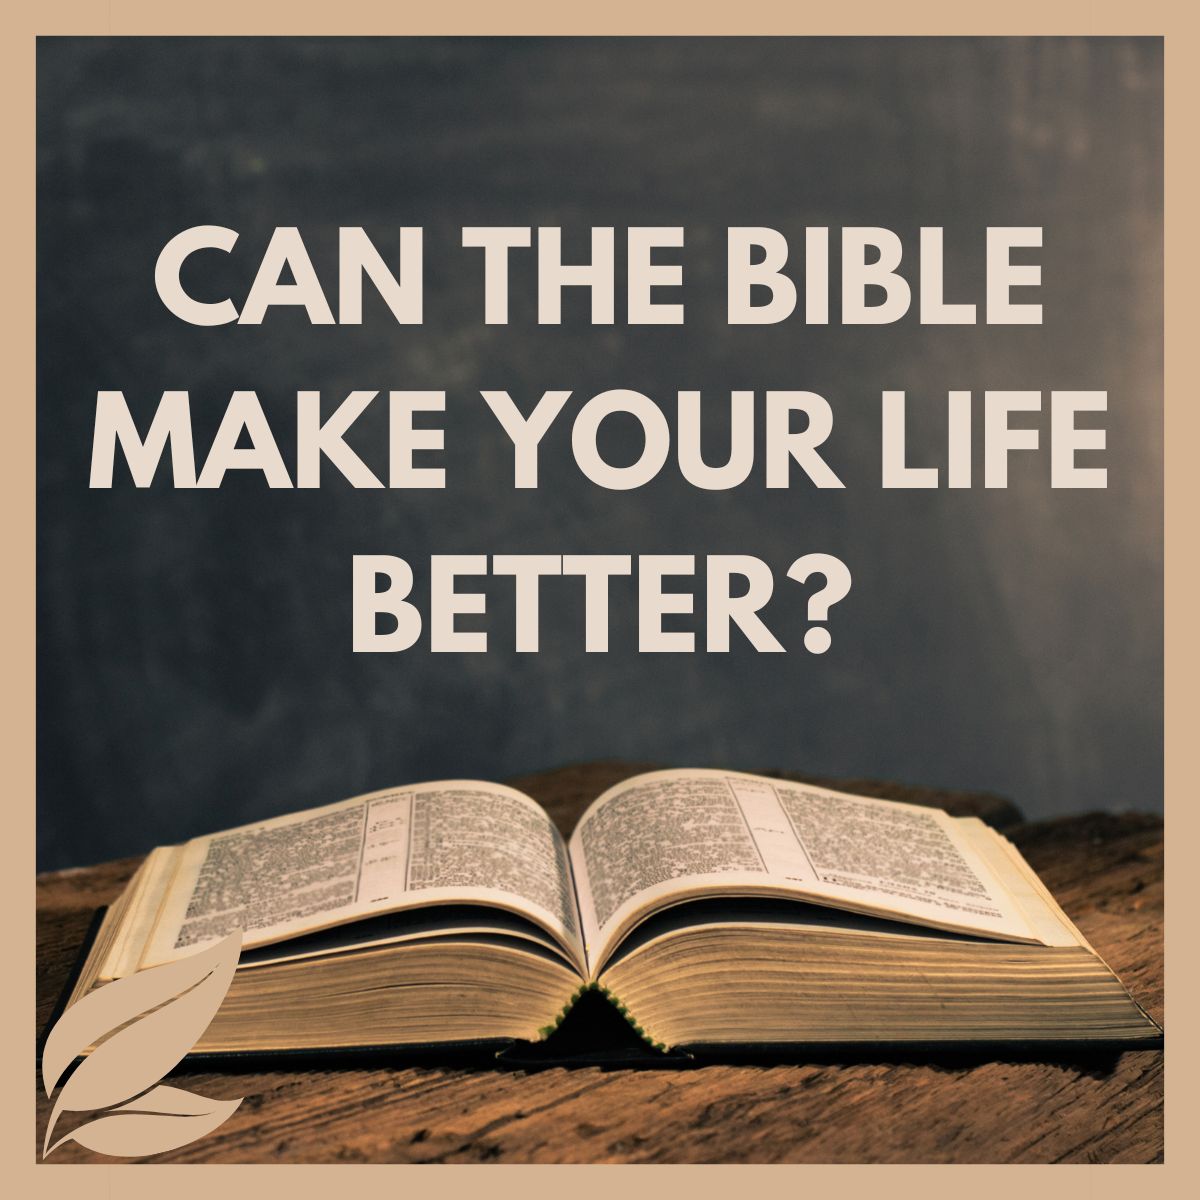 Can the Bible Make Your Life Better?